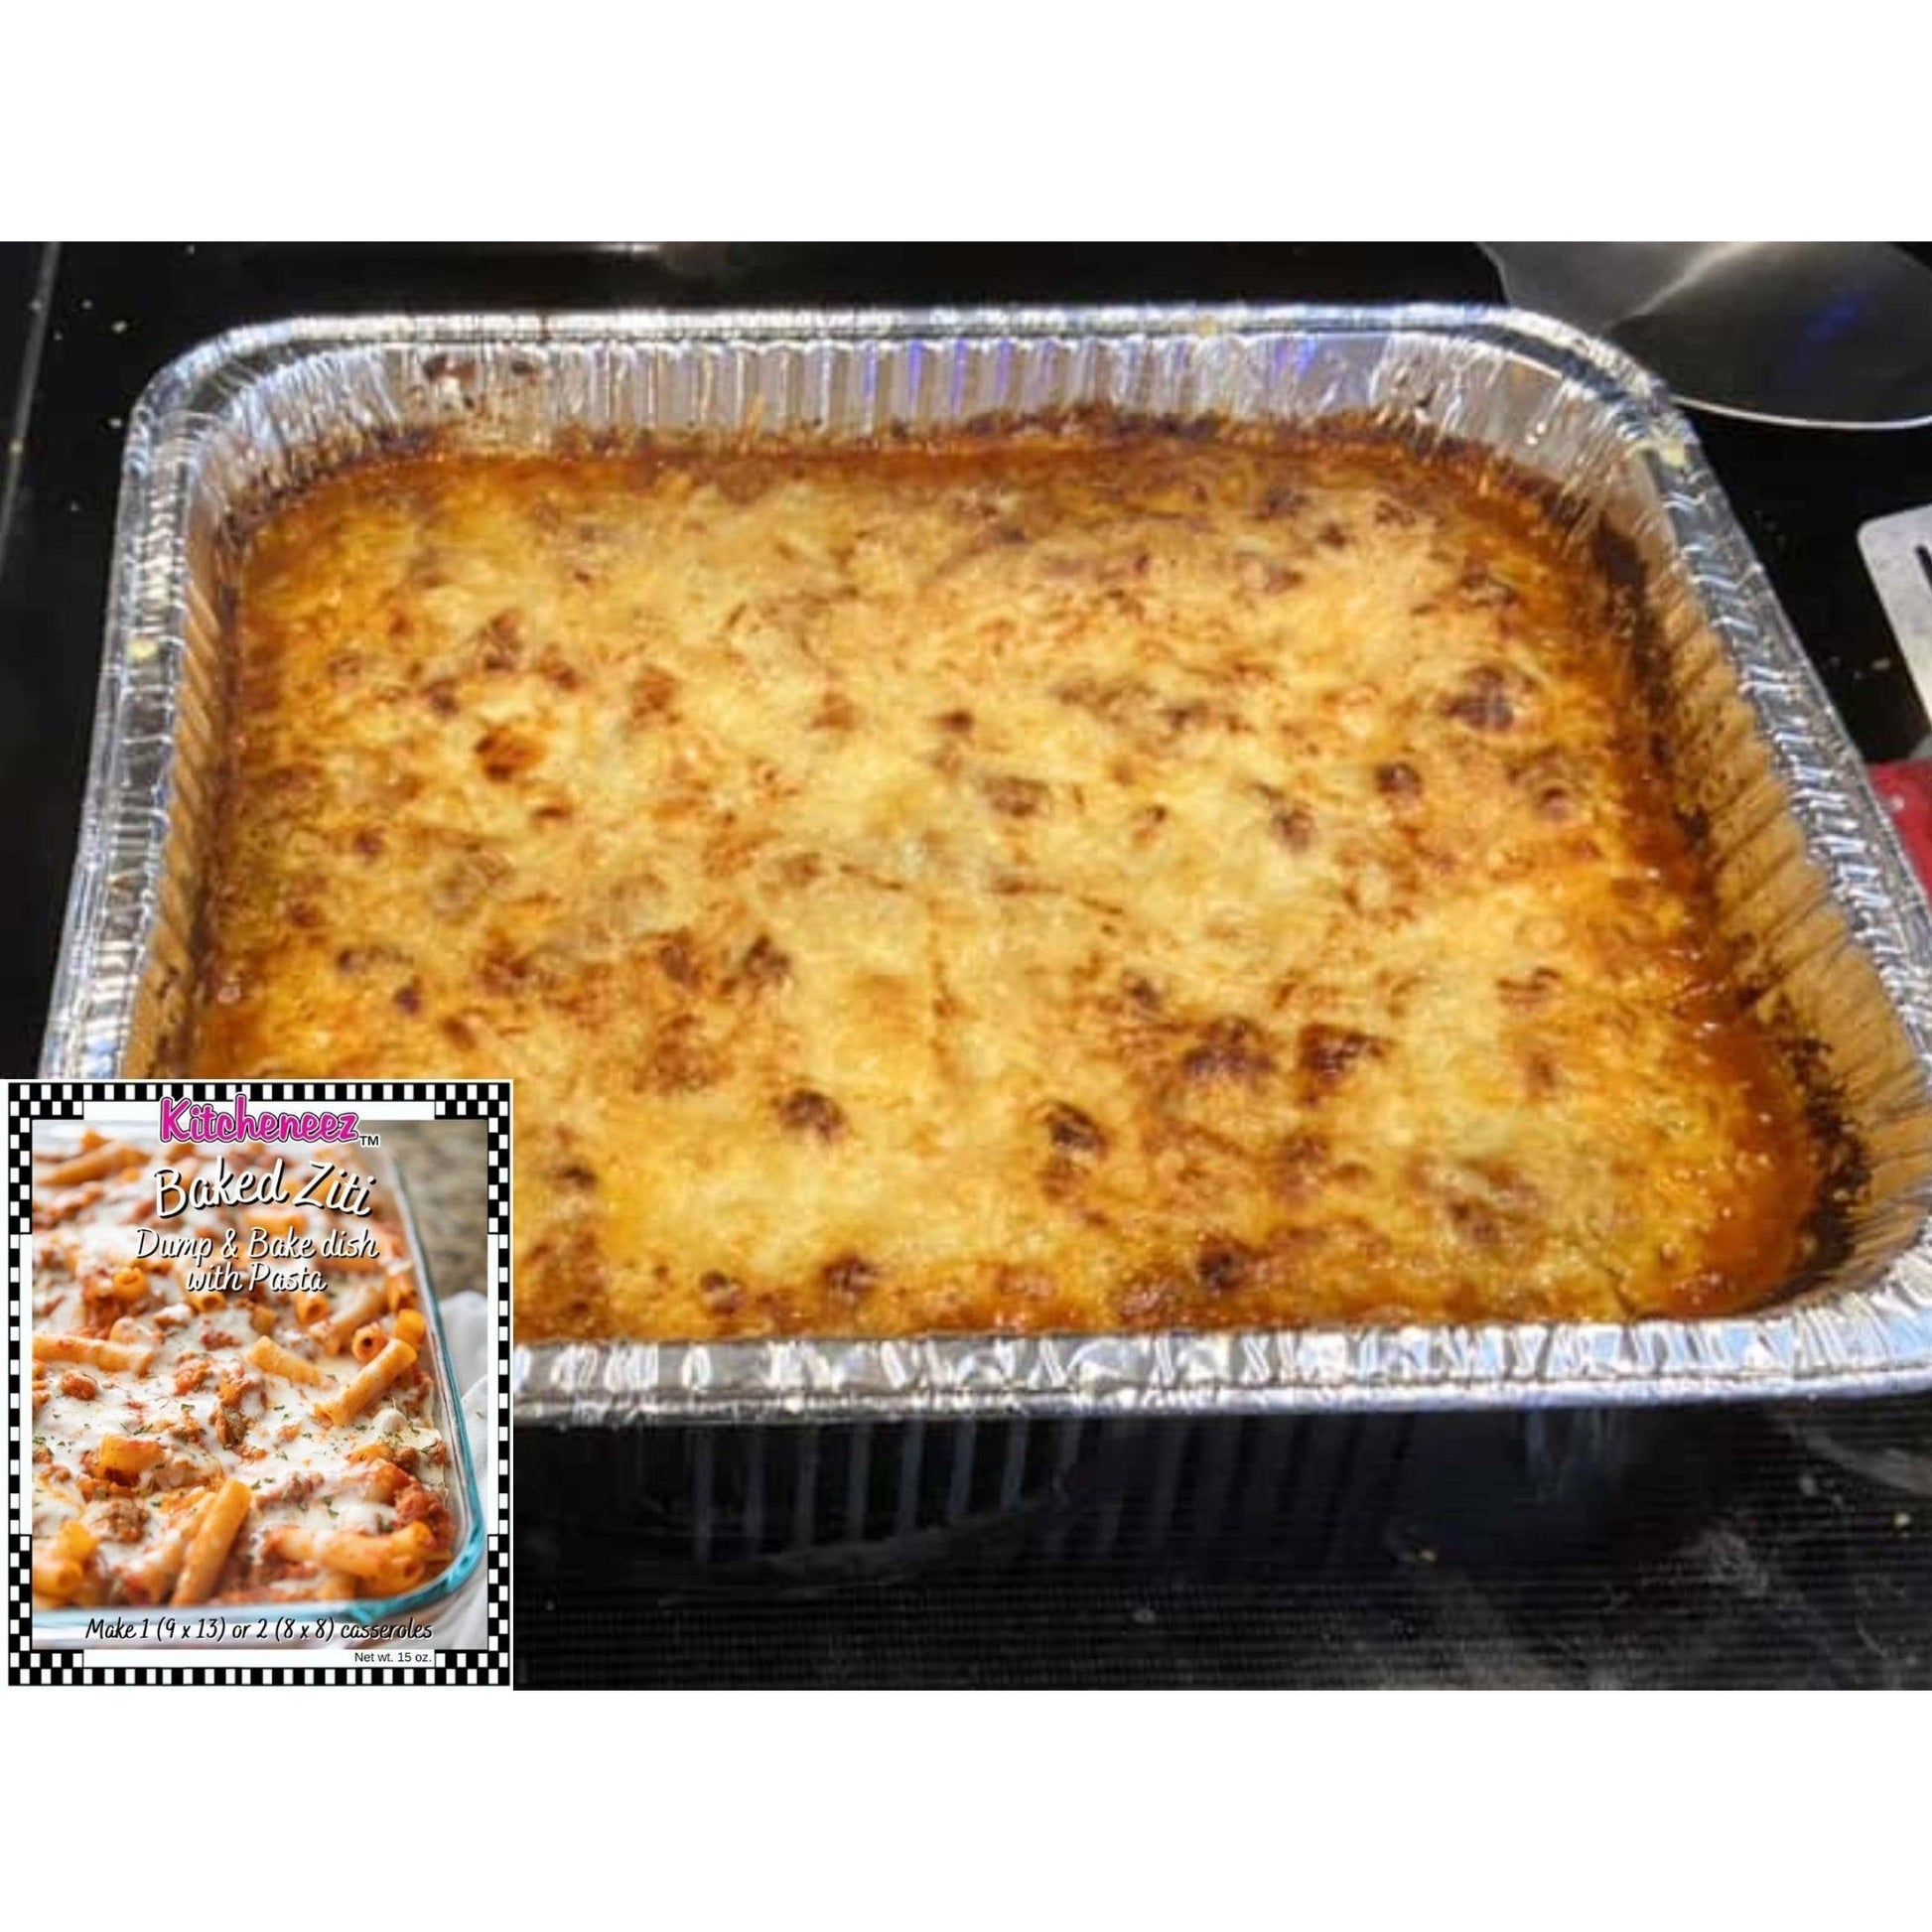 Baked Ziti Dump 'n Bake Meal Kit with pasta included - Kitcheneez Mixes & More!